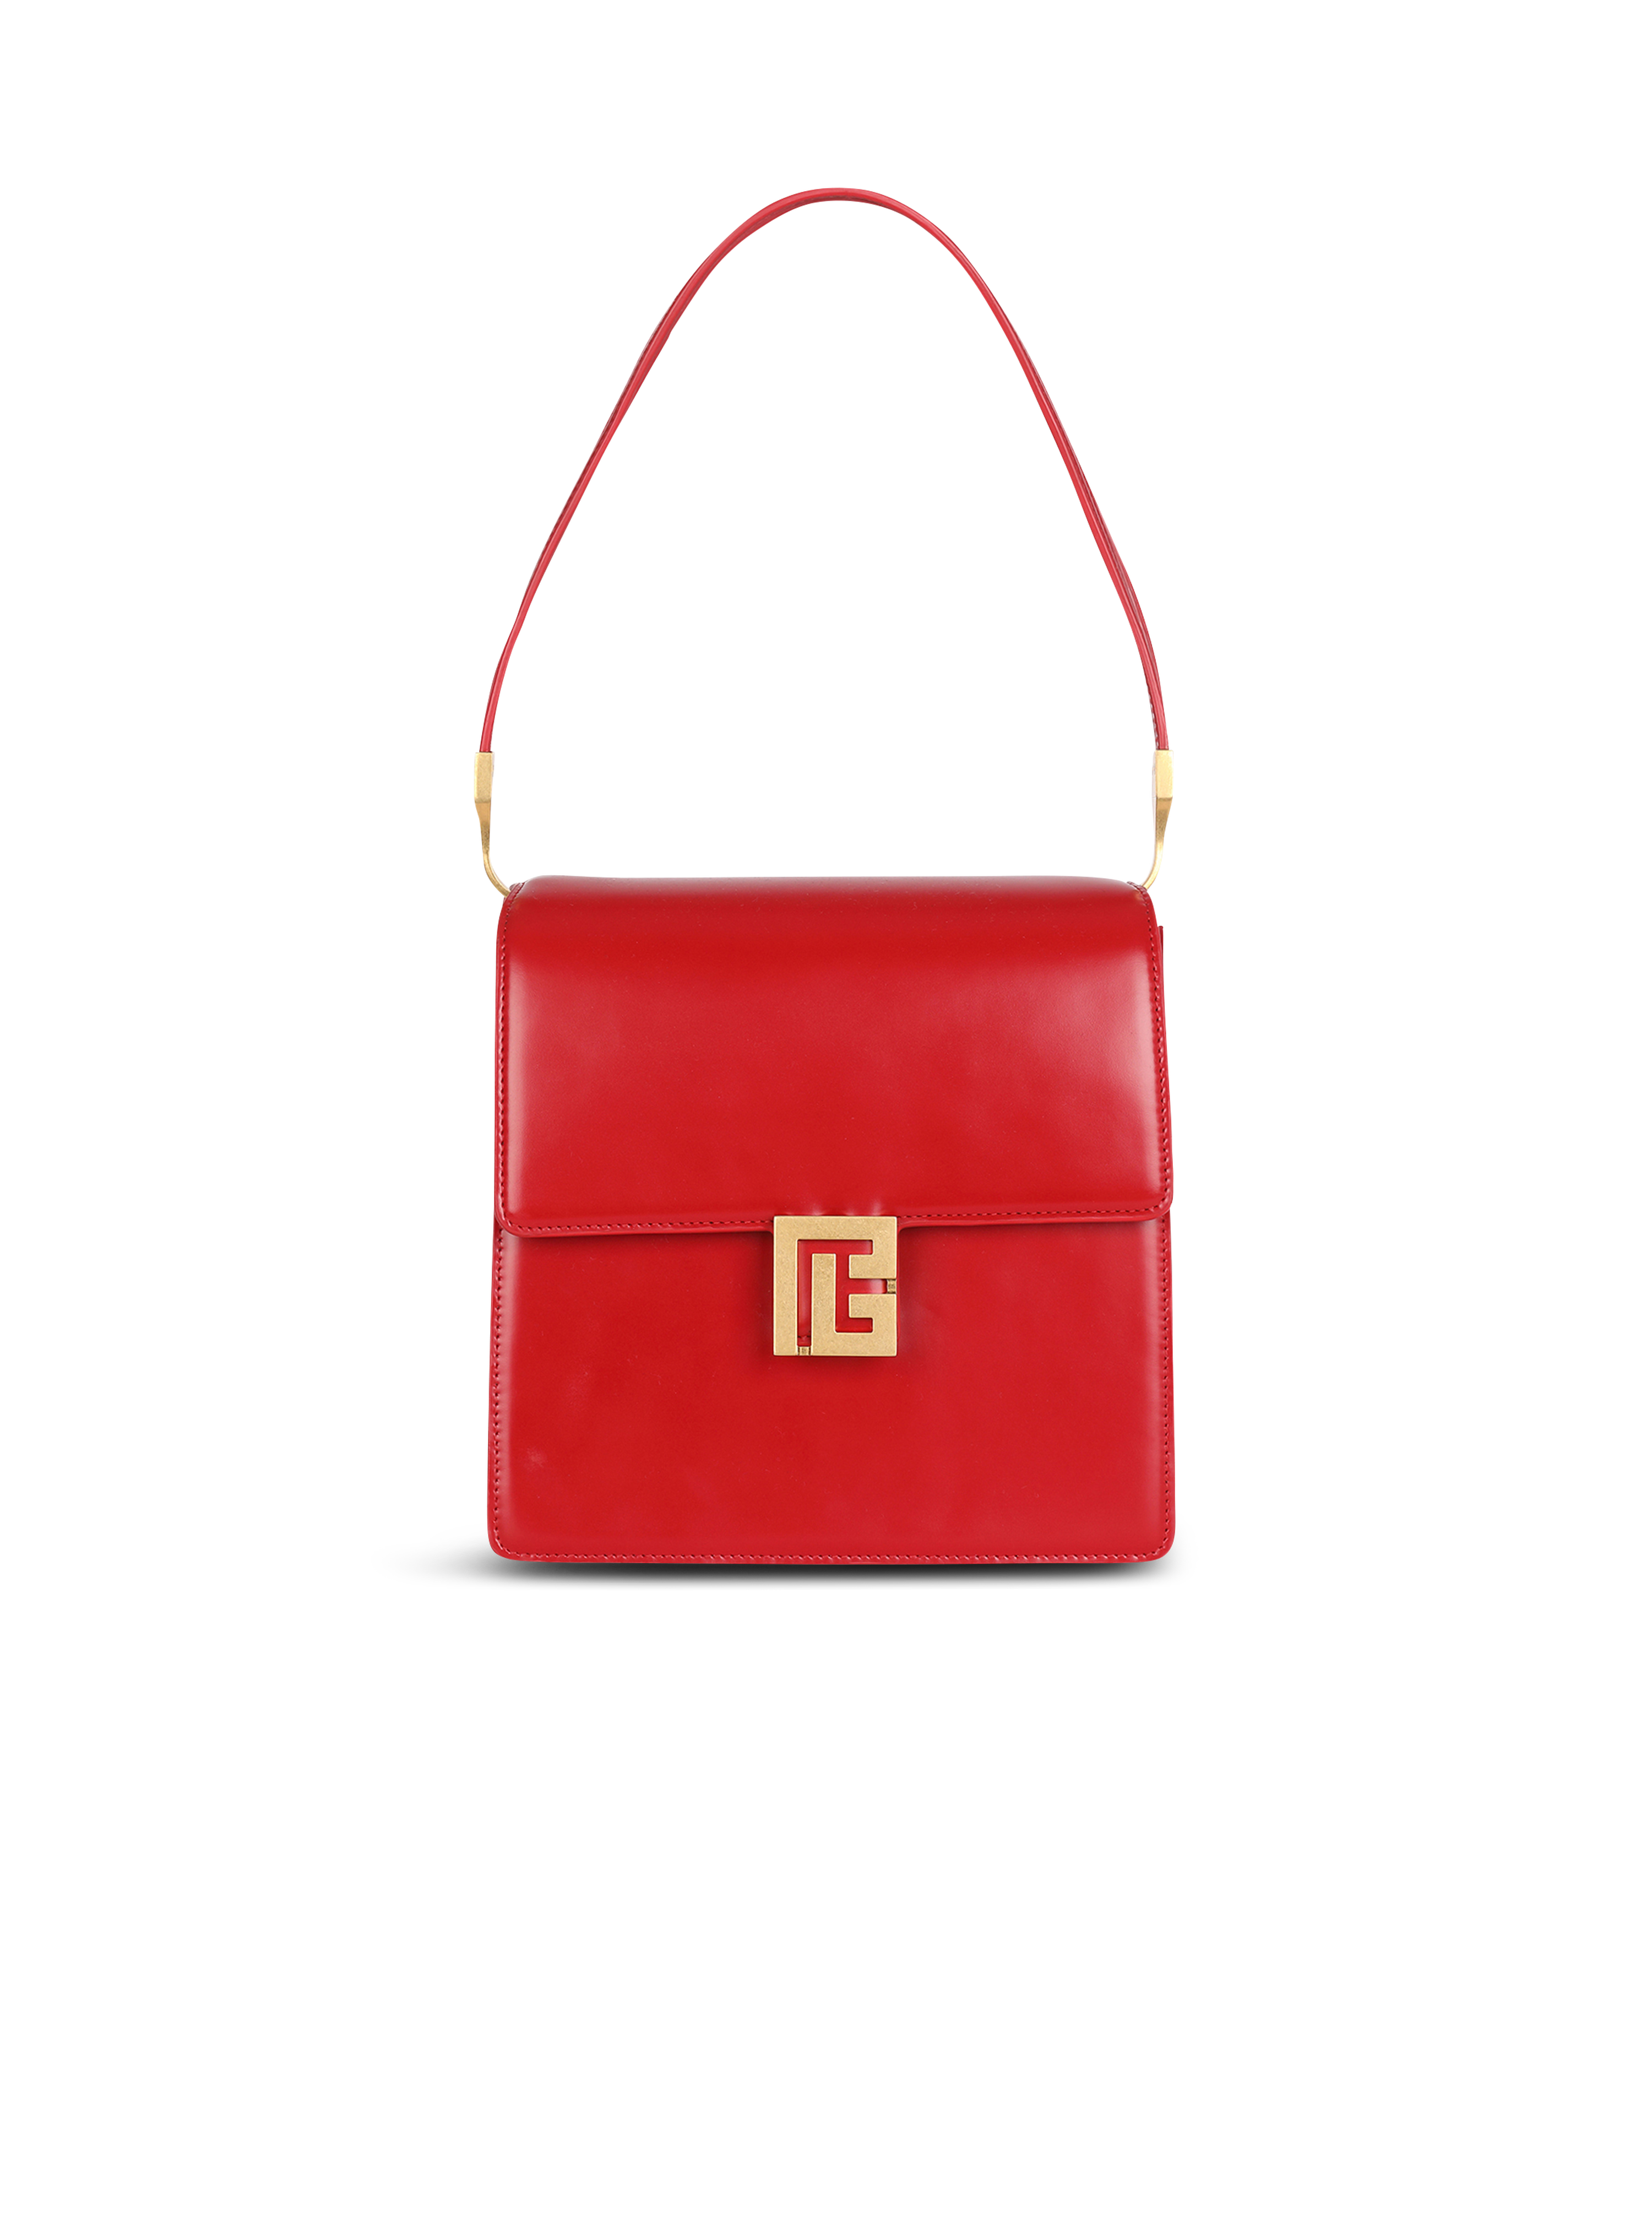 Smooth leather Ely bag, red